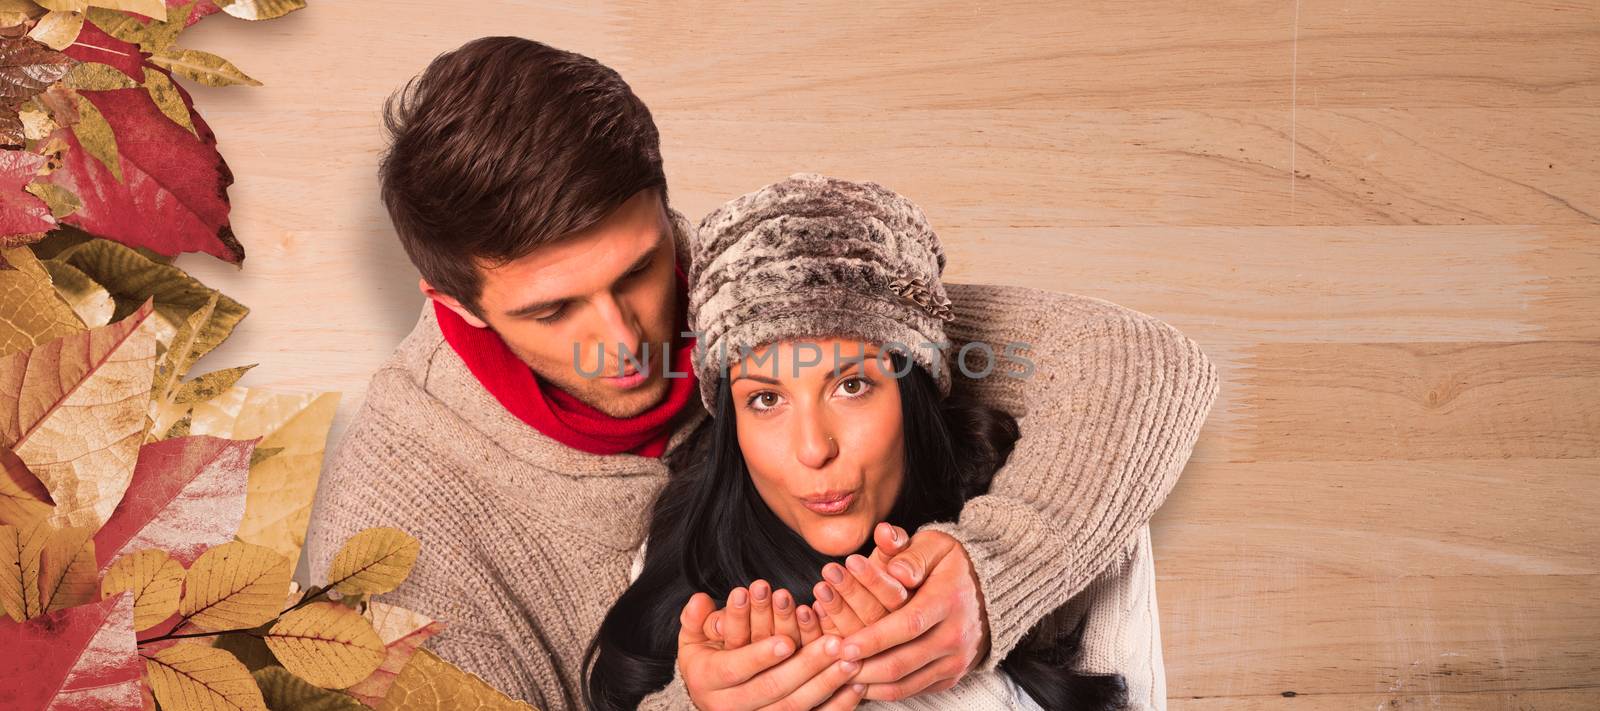 Composite image of young couple blowing over hands by Wavebreakmedia